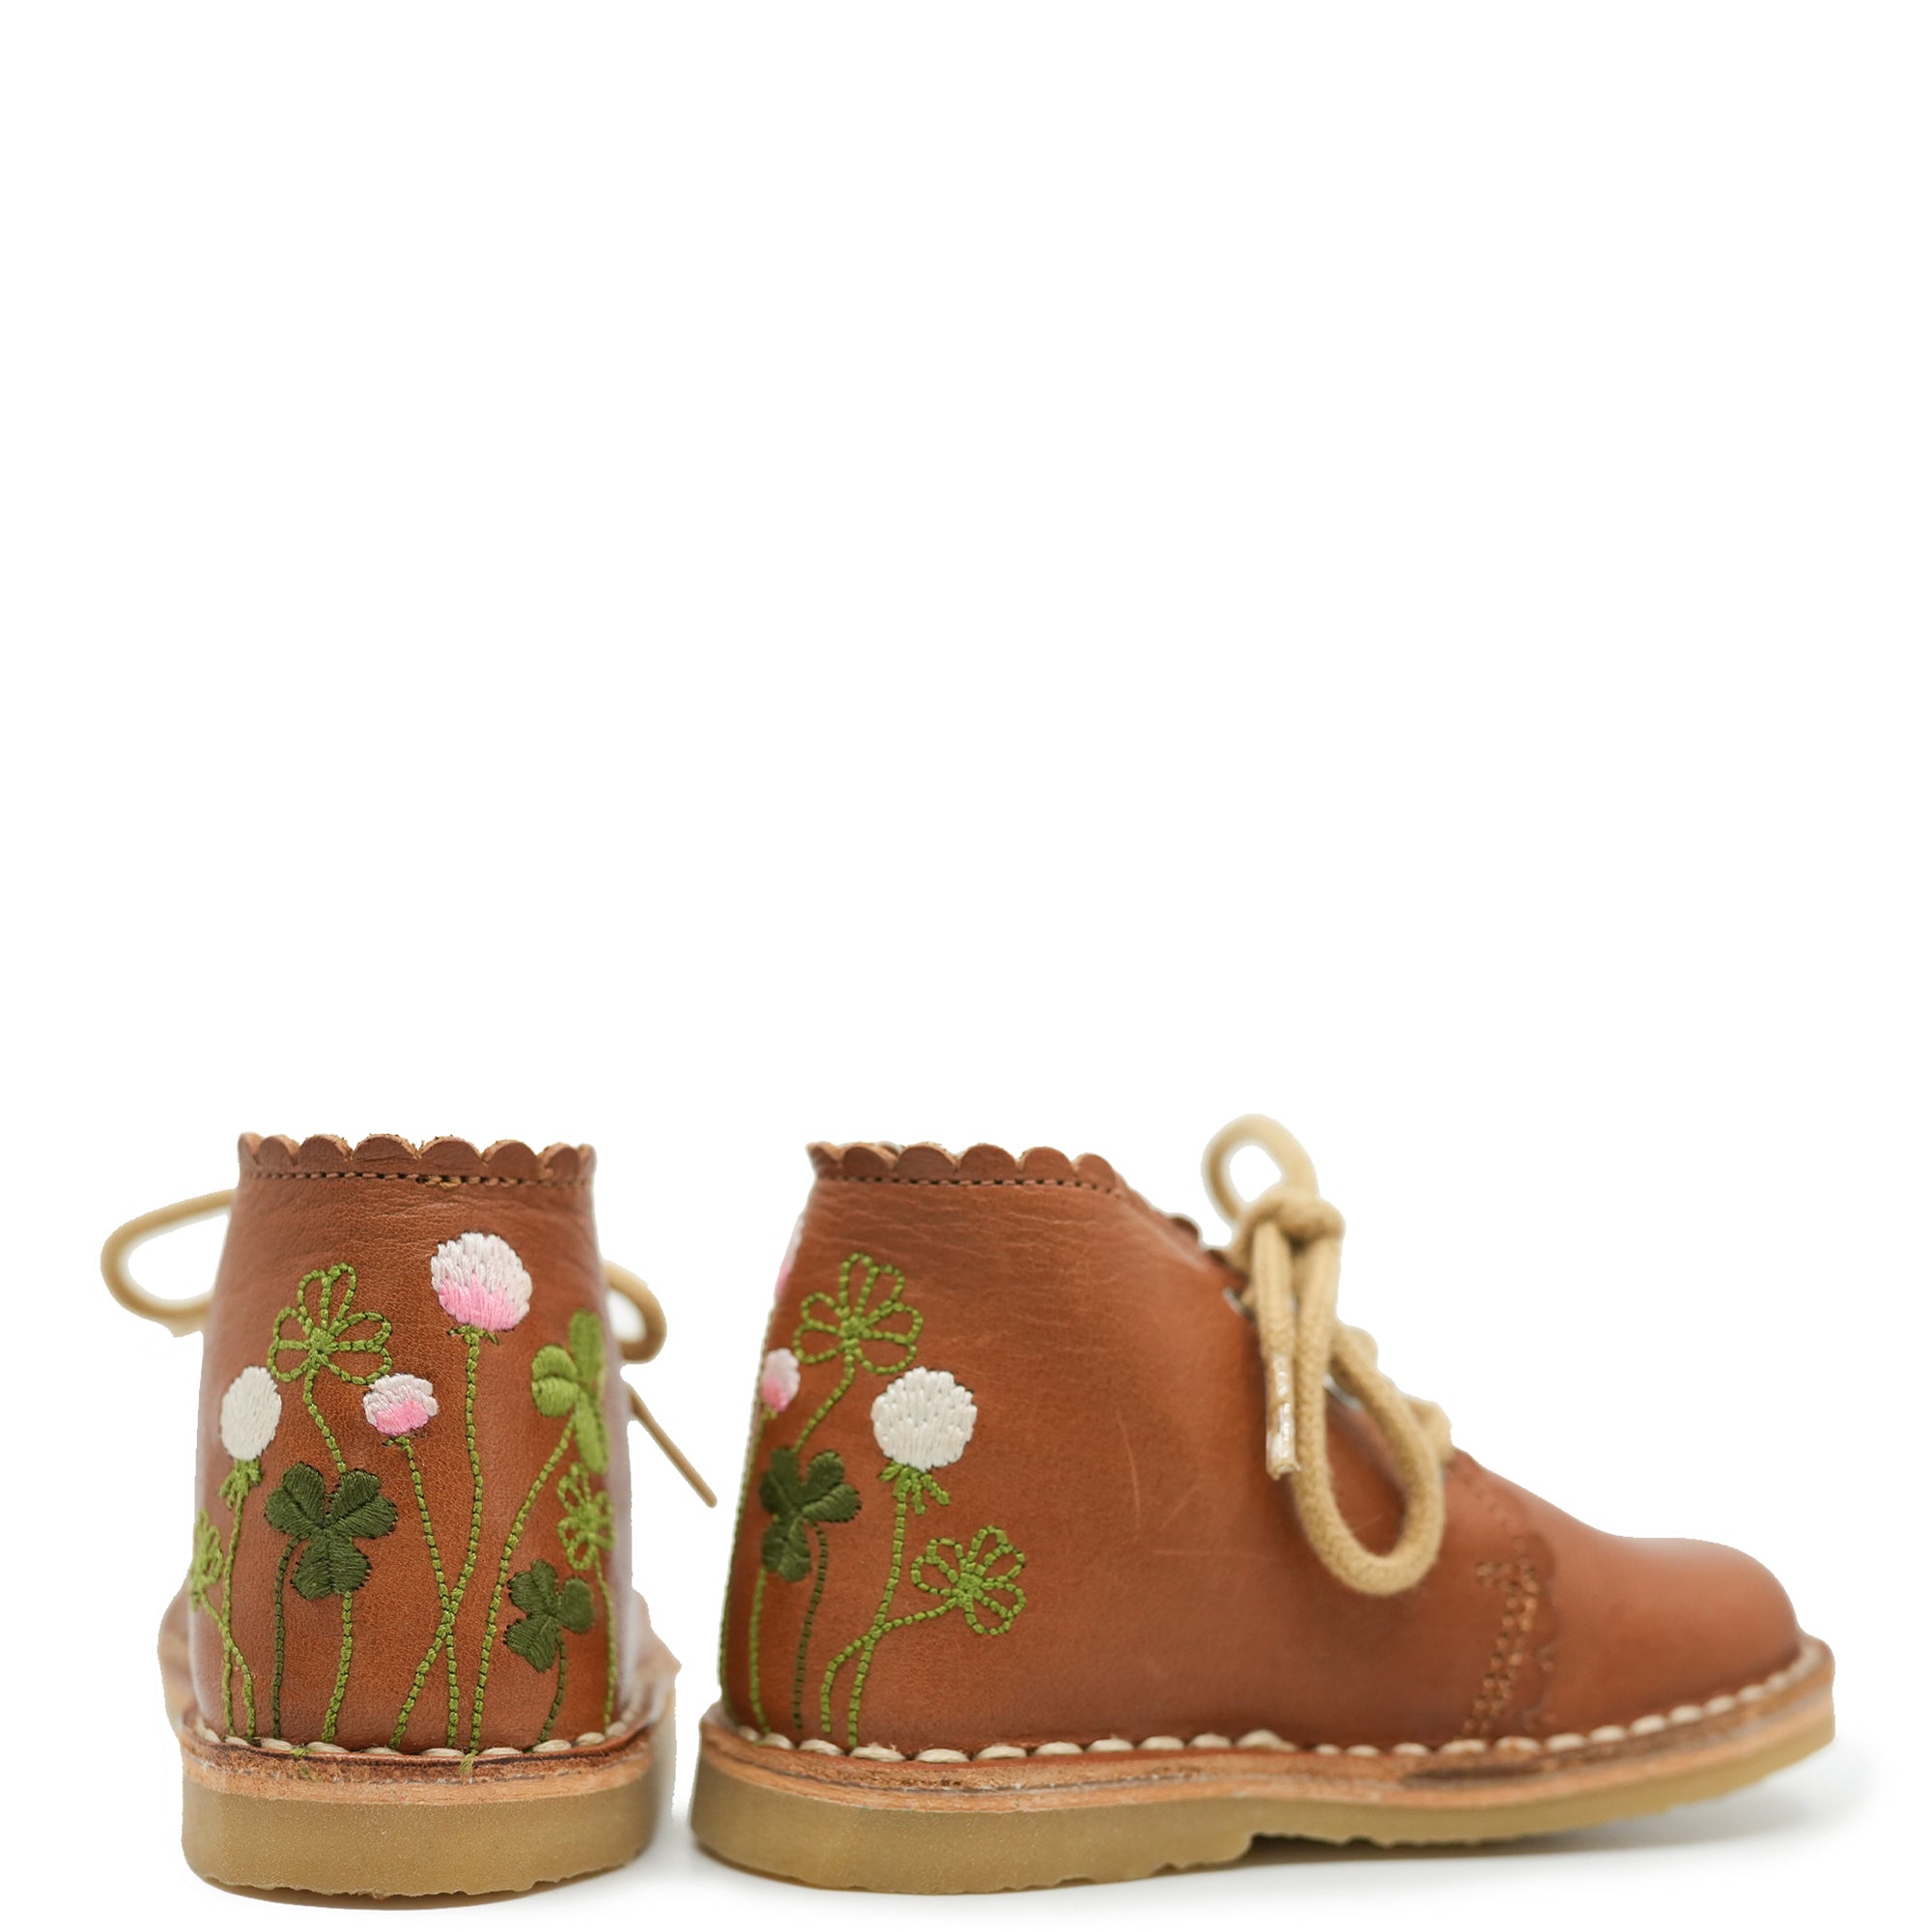 Petit Nord Clover Embroidered Baby Bootie-Tassel Children Shoes